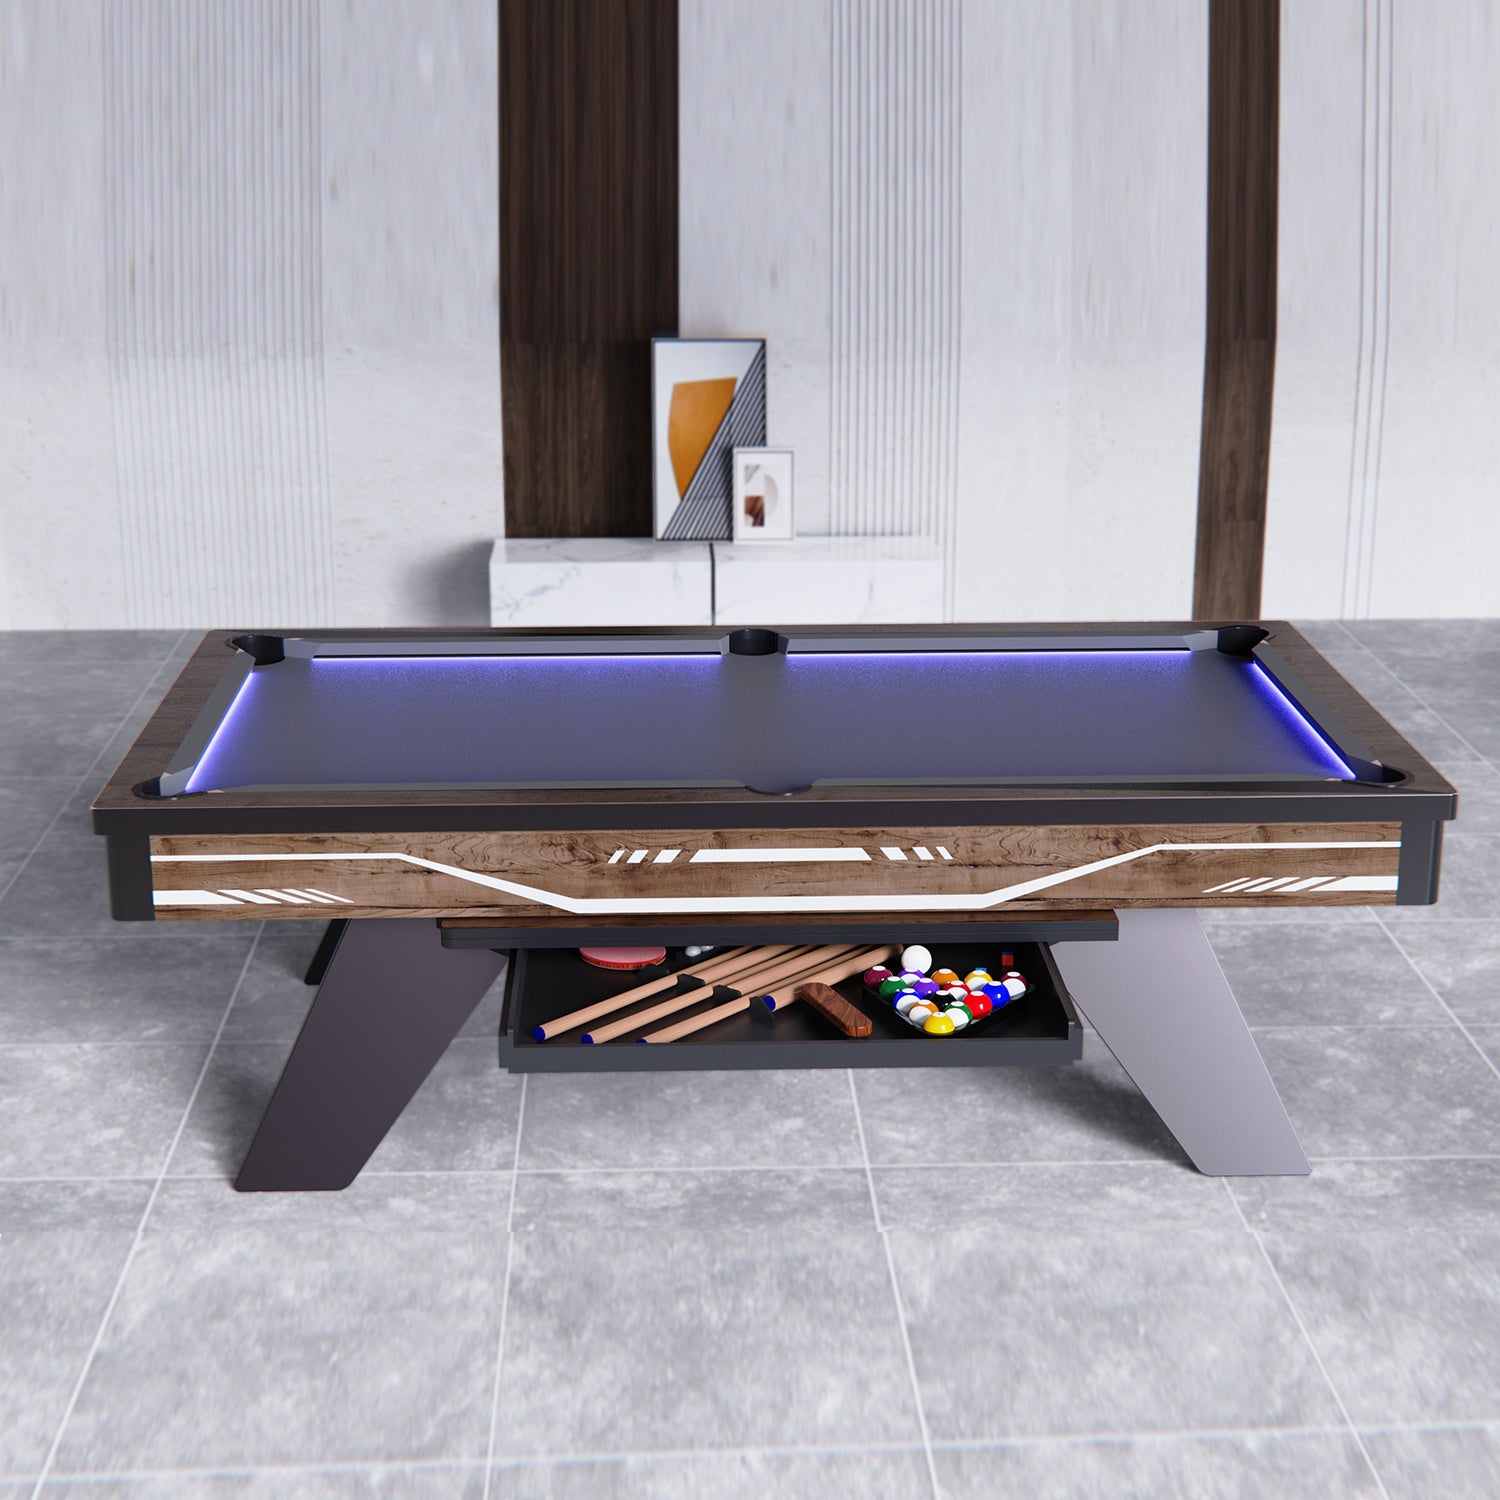 Cooma Dining/Office Pool Table-7FT 3IN1